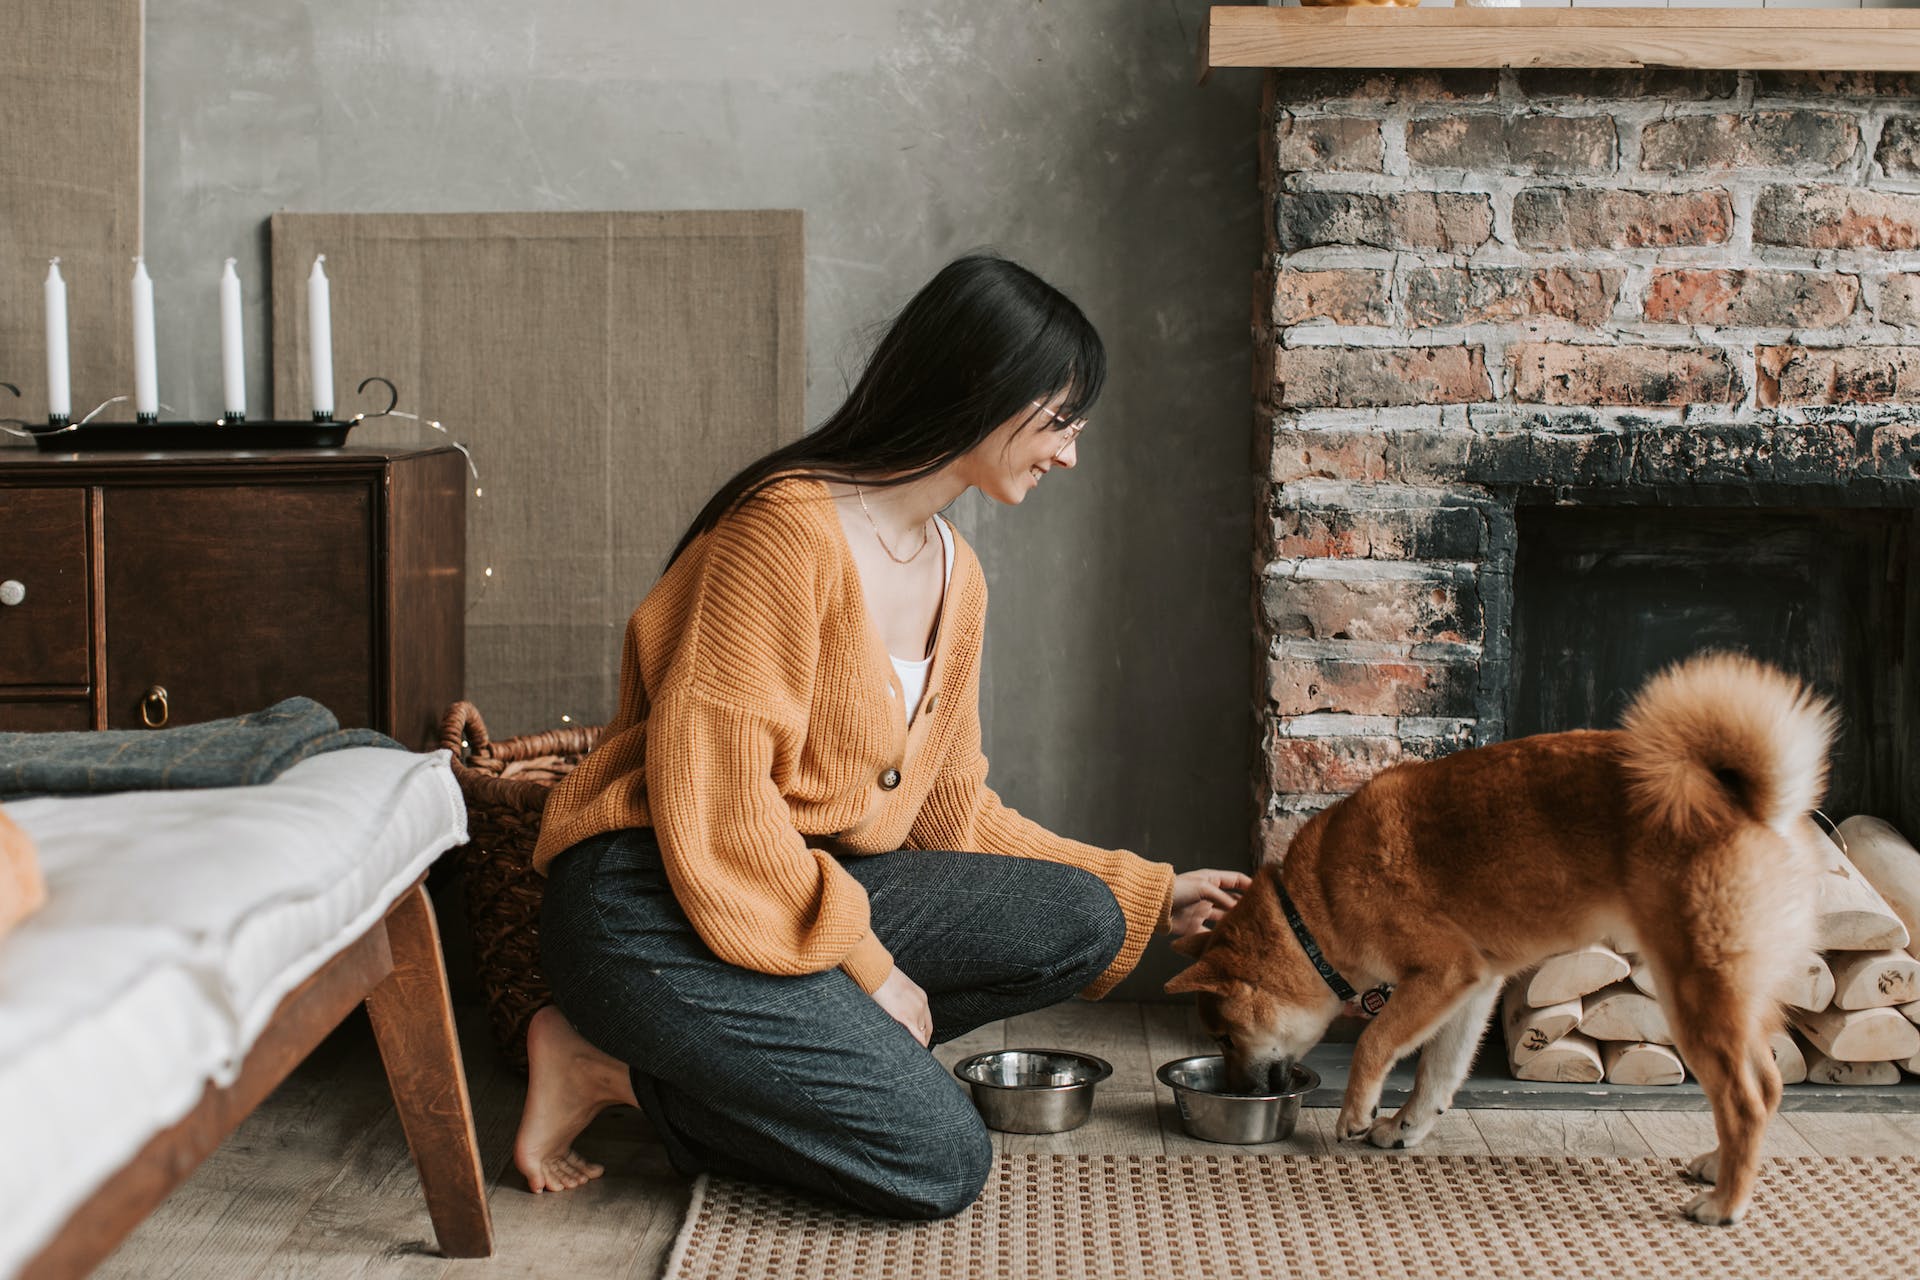 A woman feeding her dog in a living room